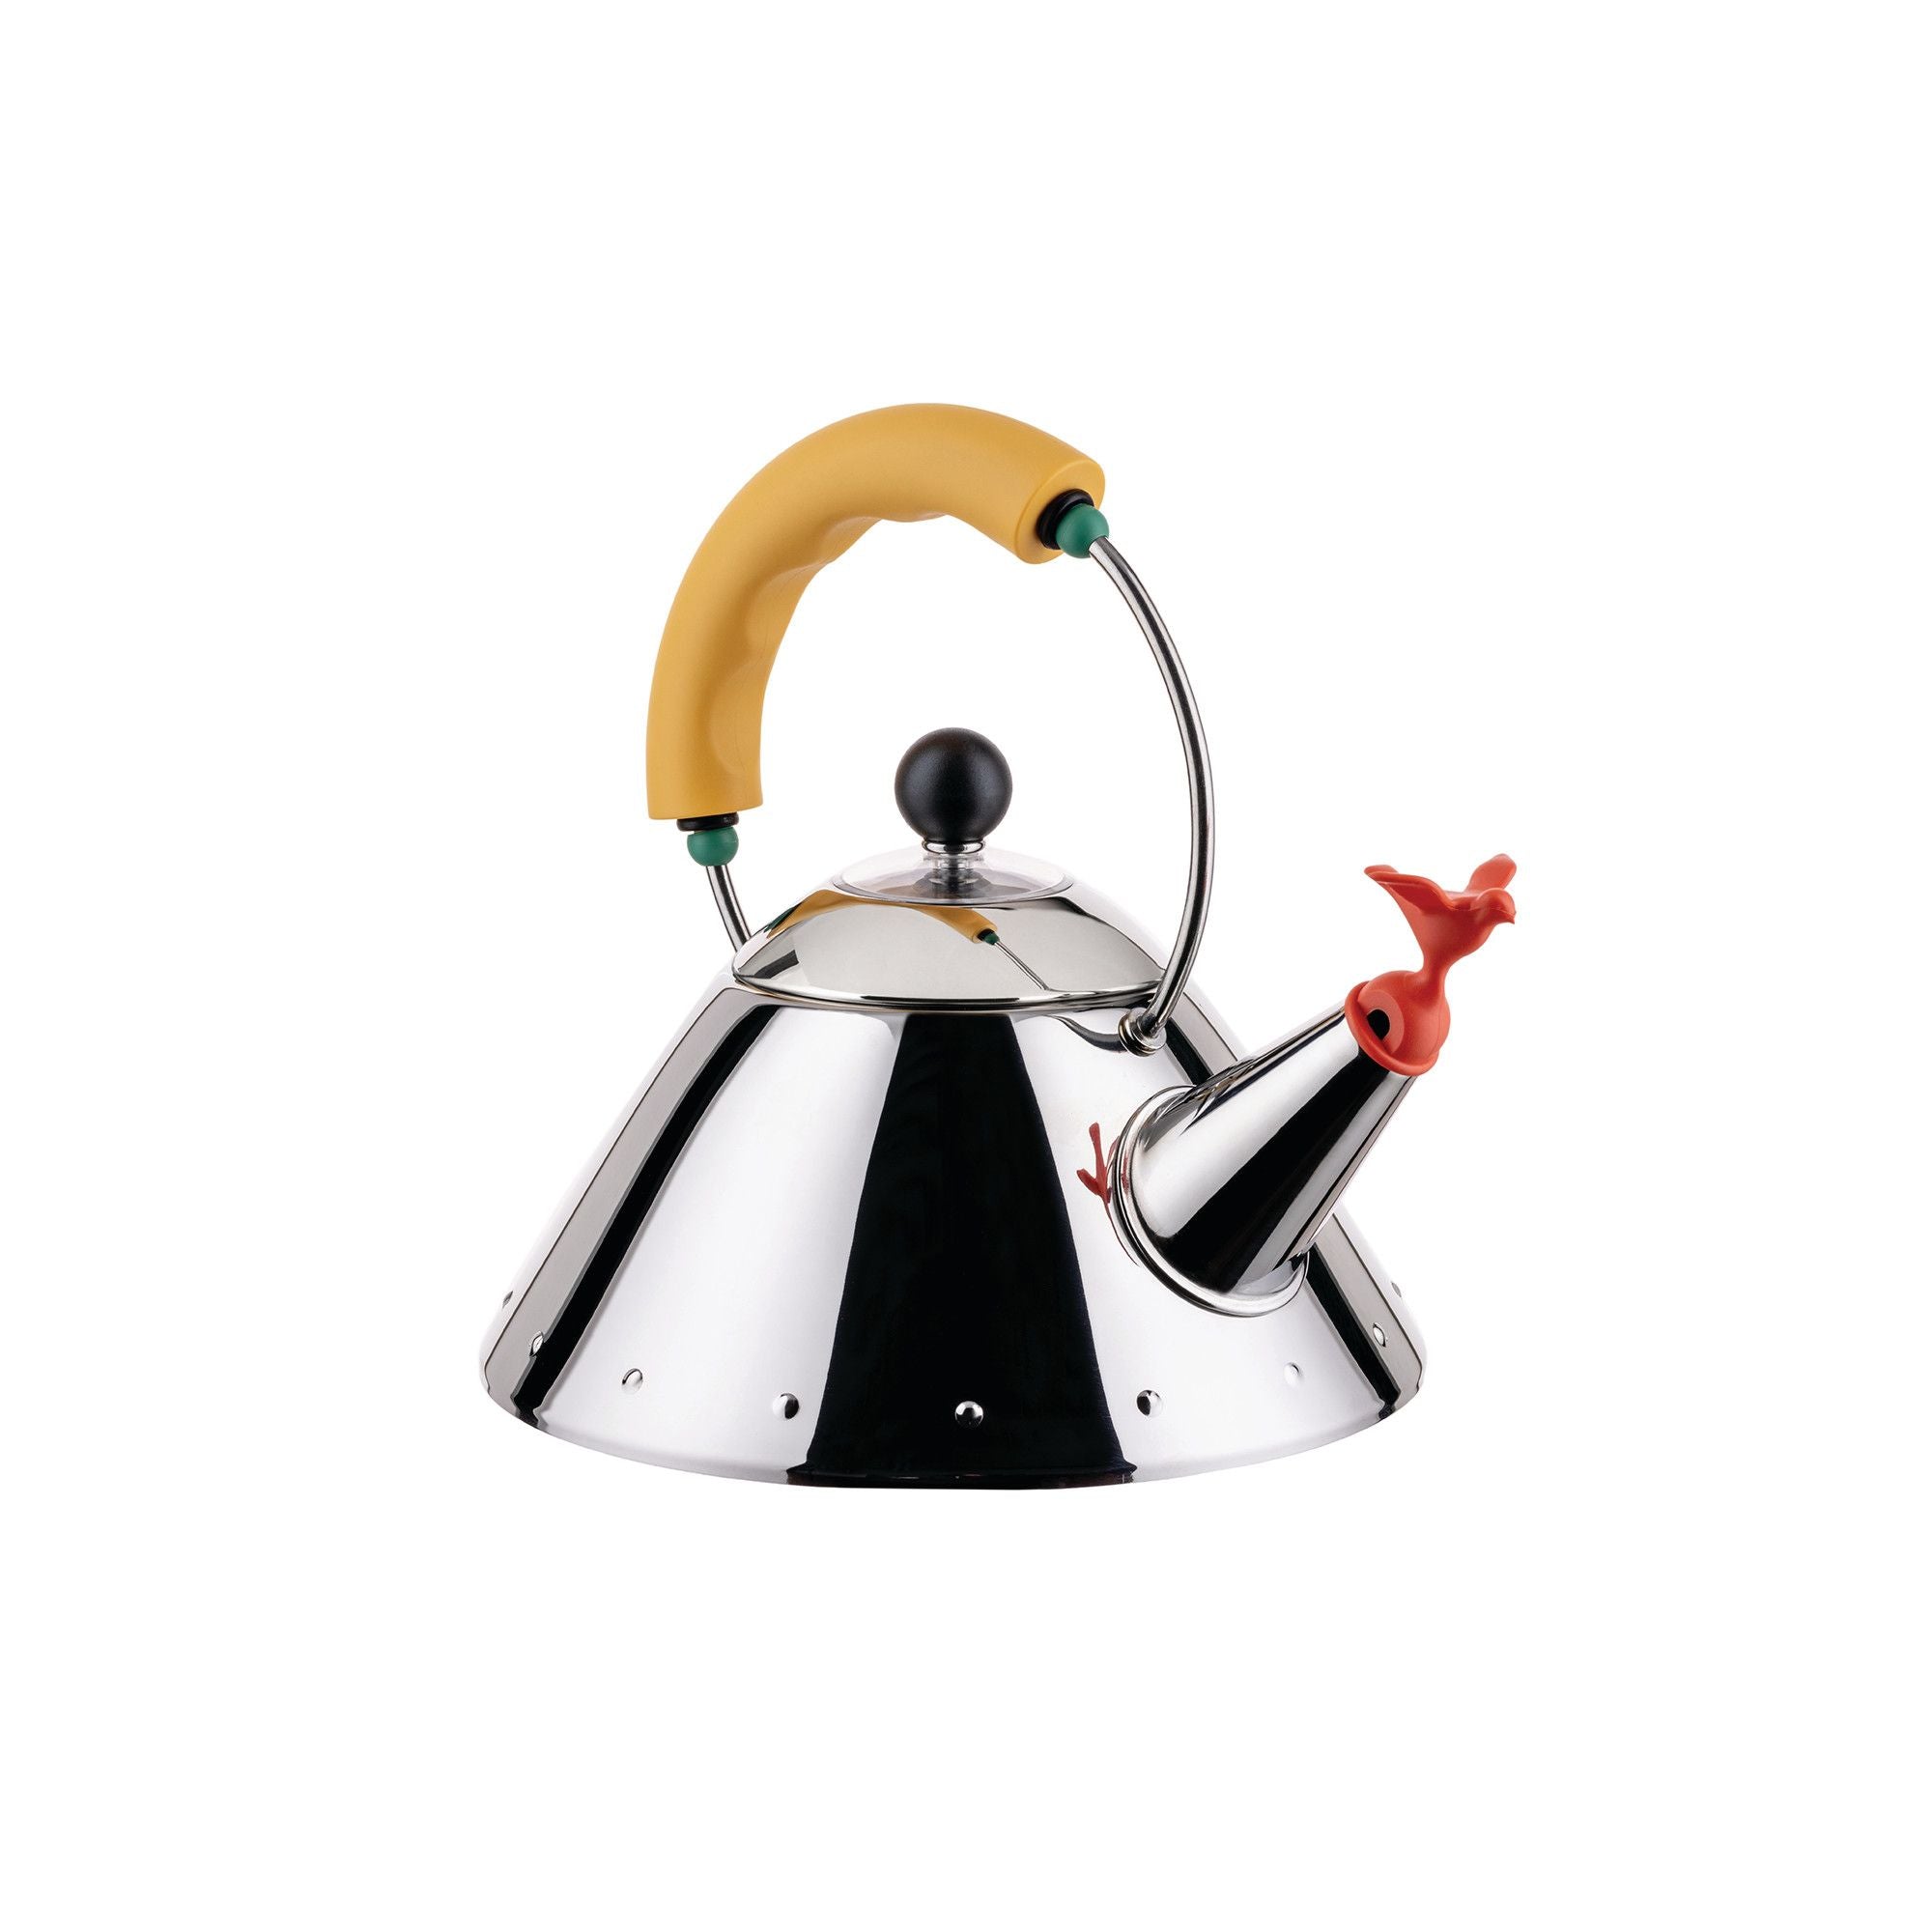 Alessi 9093 Kettle 1 L, Yellow